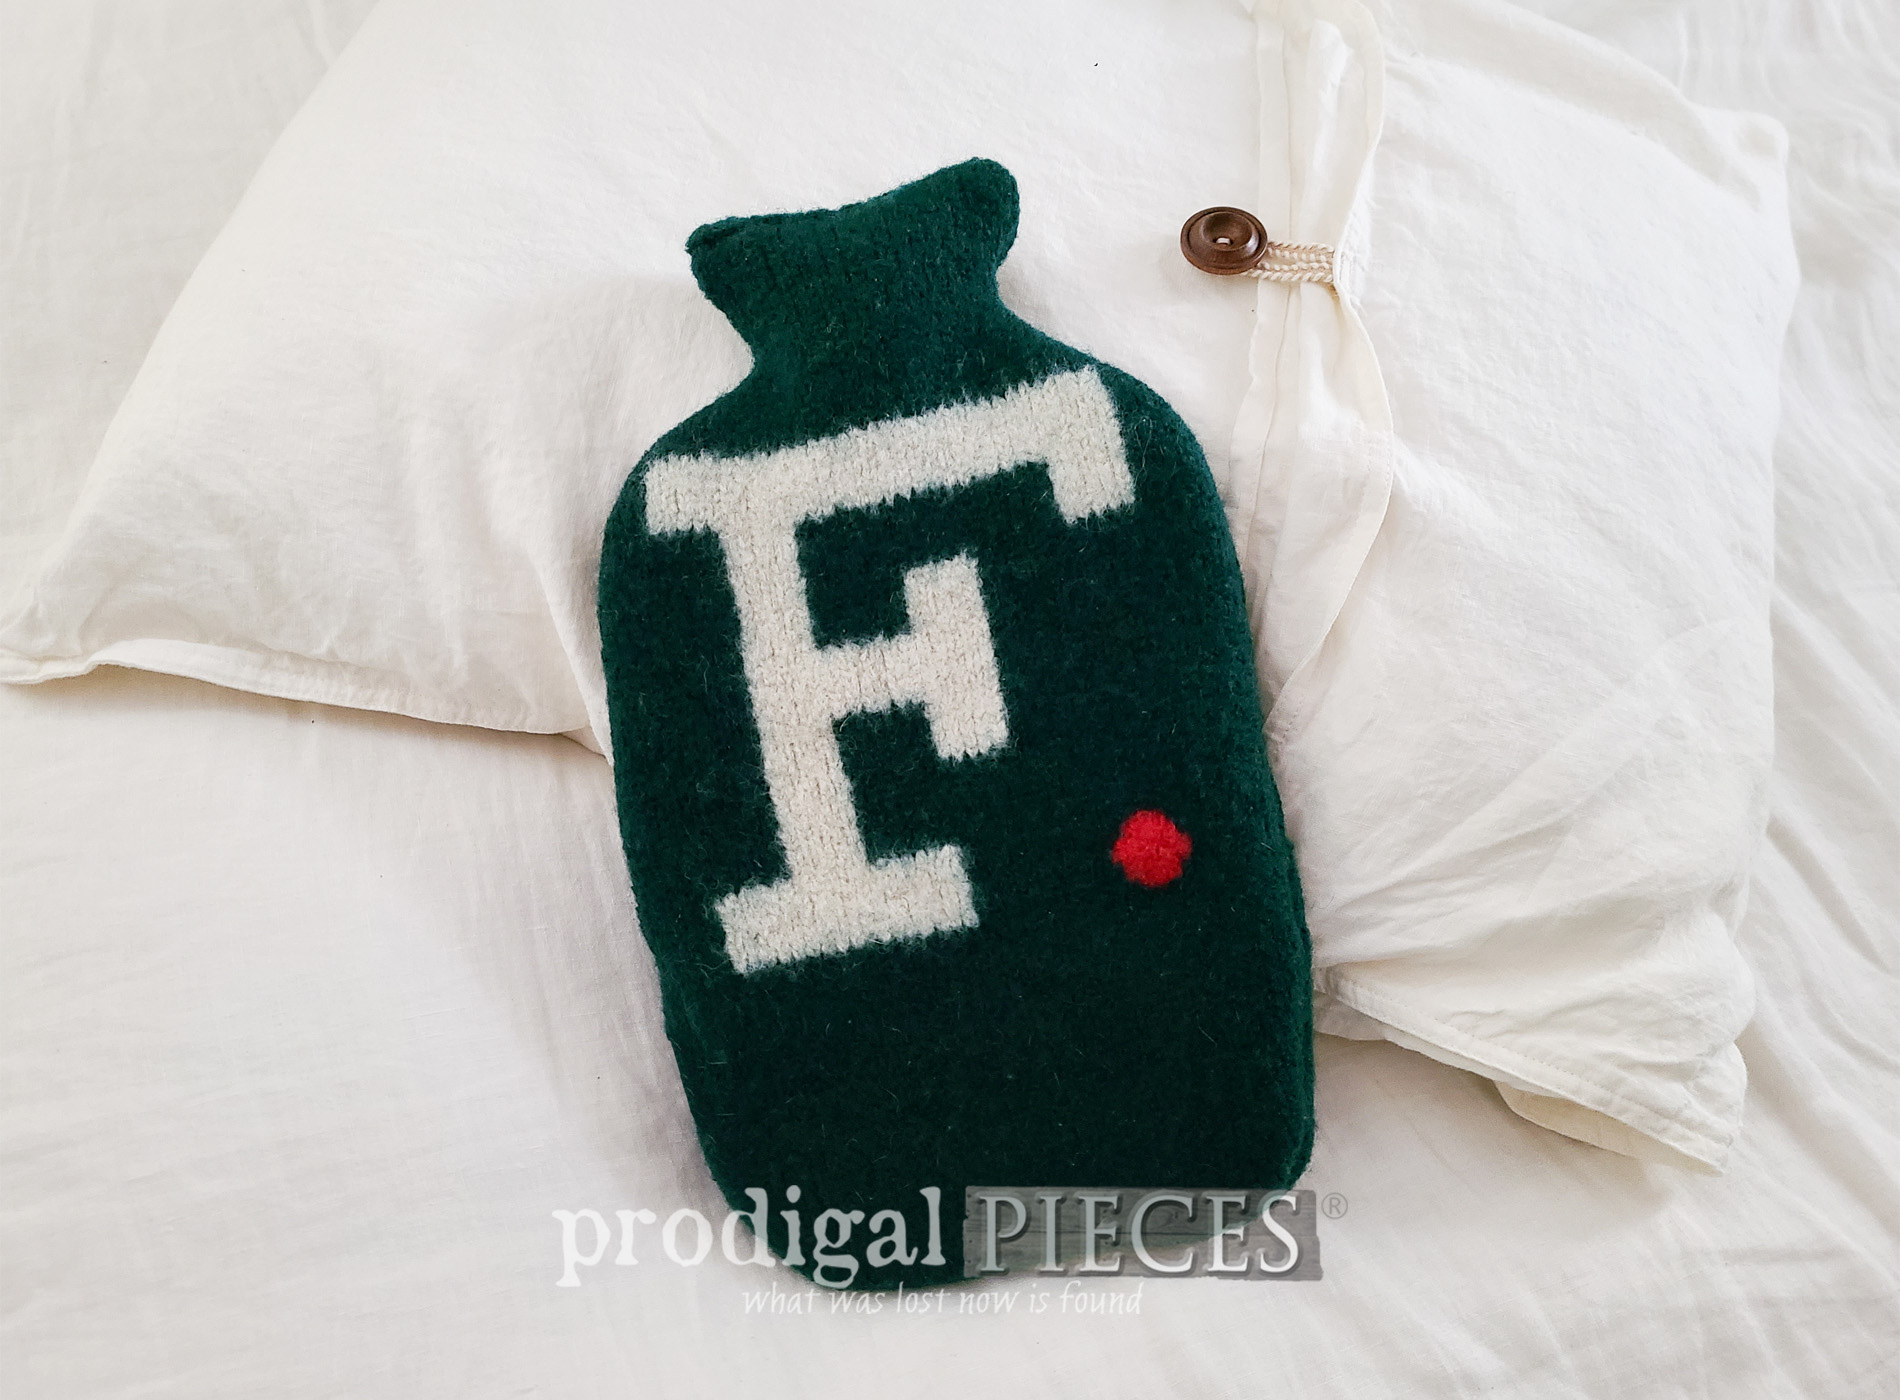 DIY Hot Water Bottle from Thrifted, Felted Sweater by Larissa of Prodigal Pieces | prodigalpieces.com #prodigalpieces #refashion #upcycled #diy #handmade